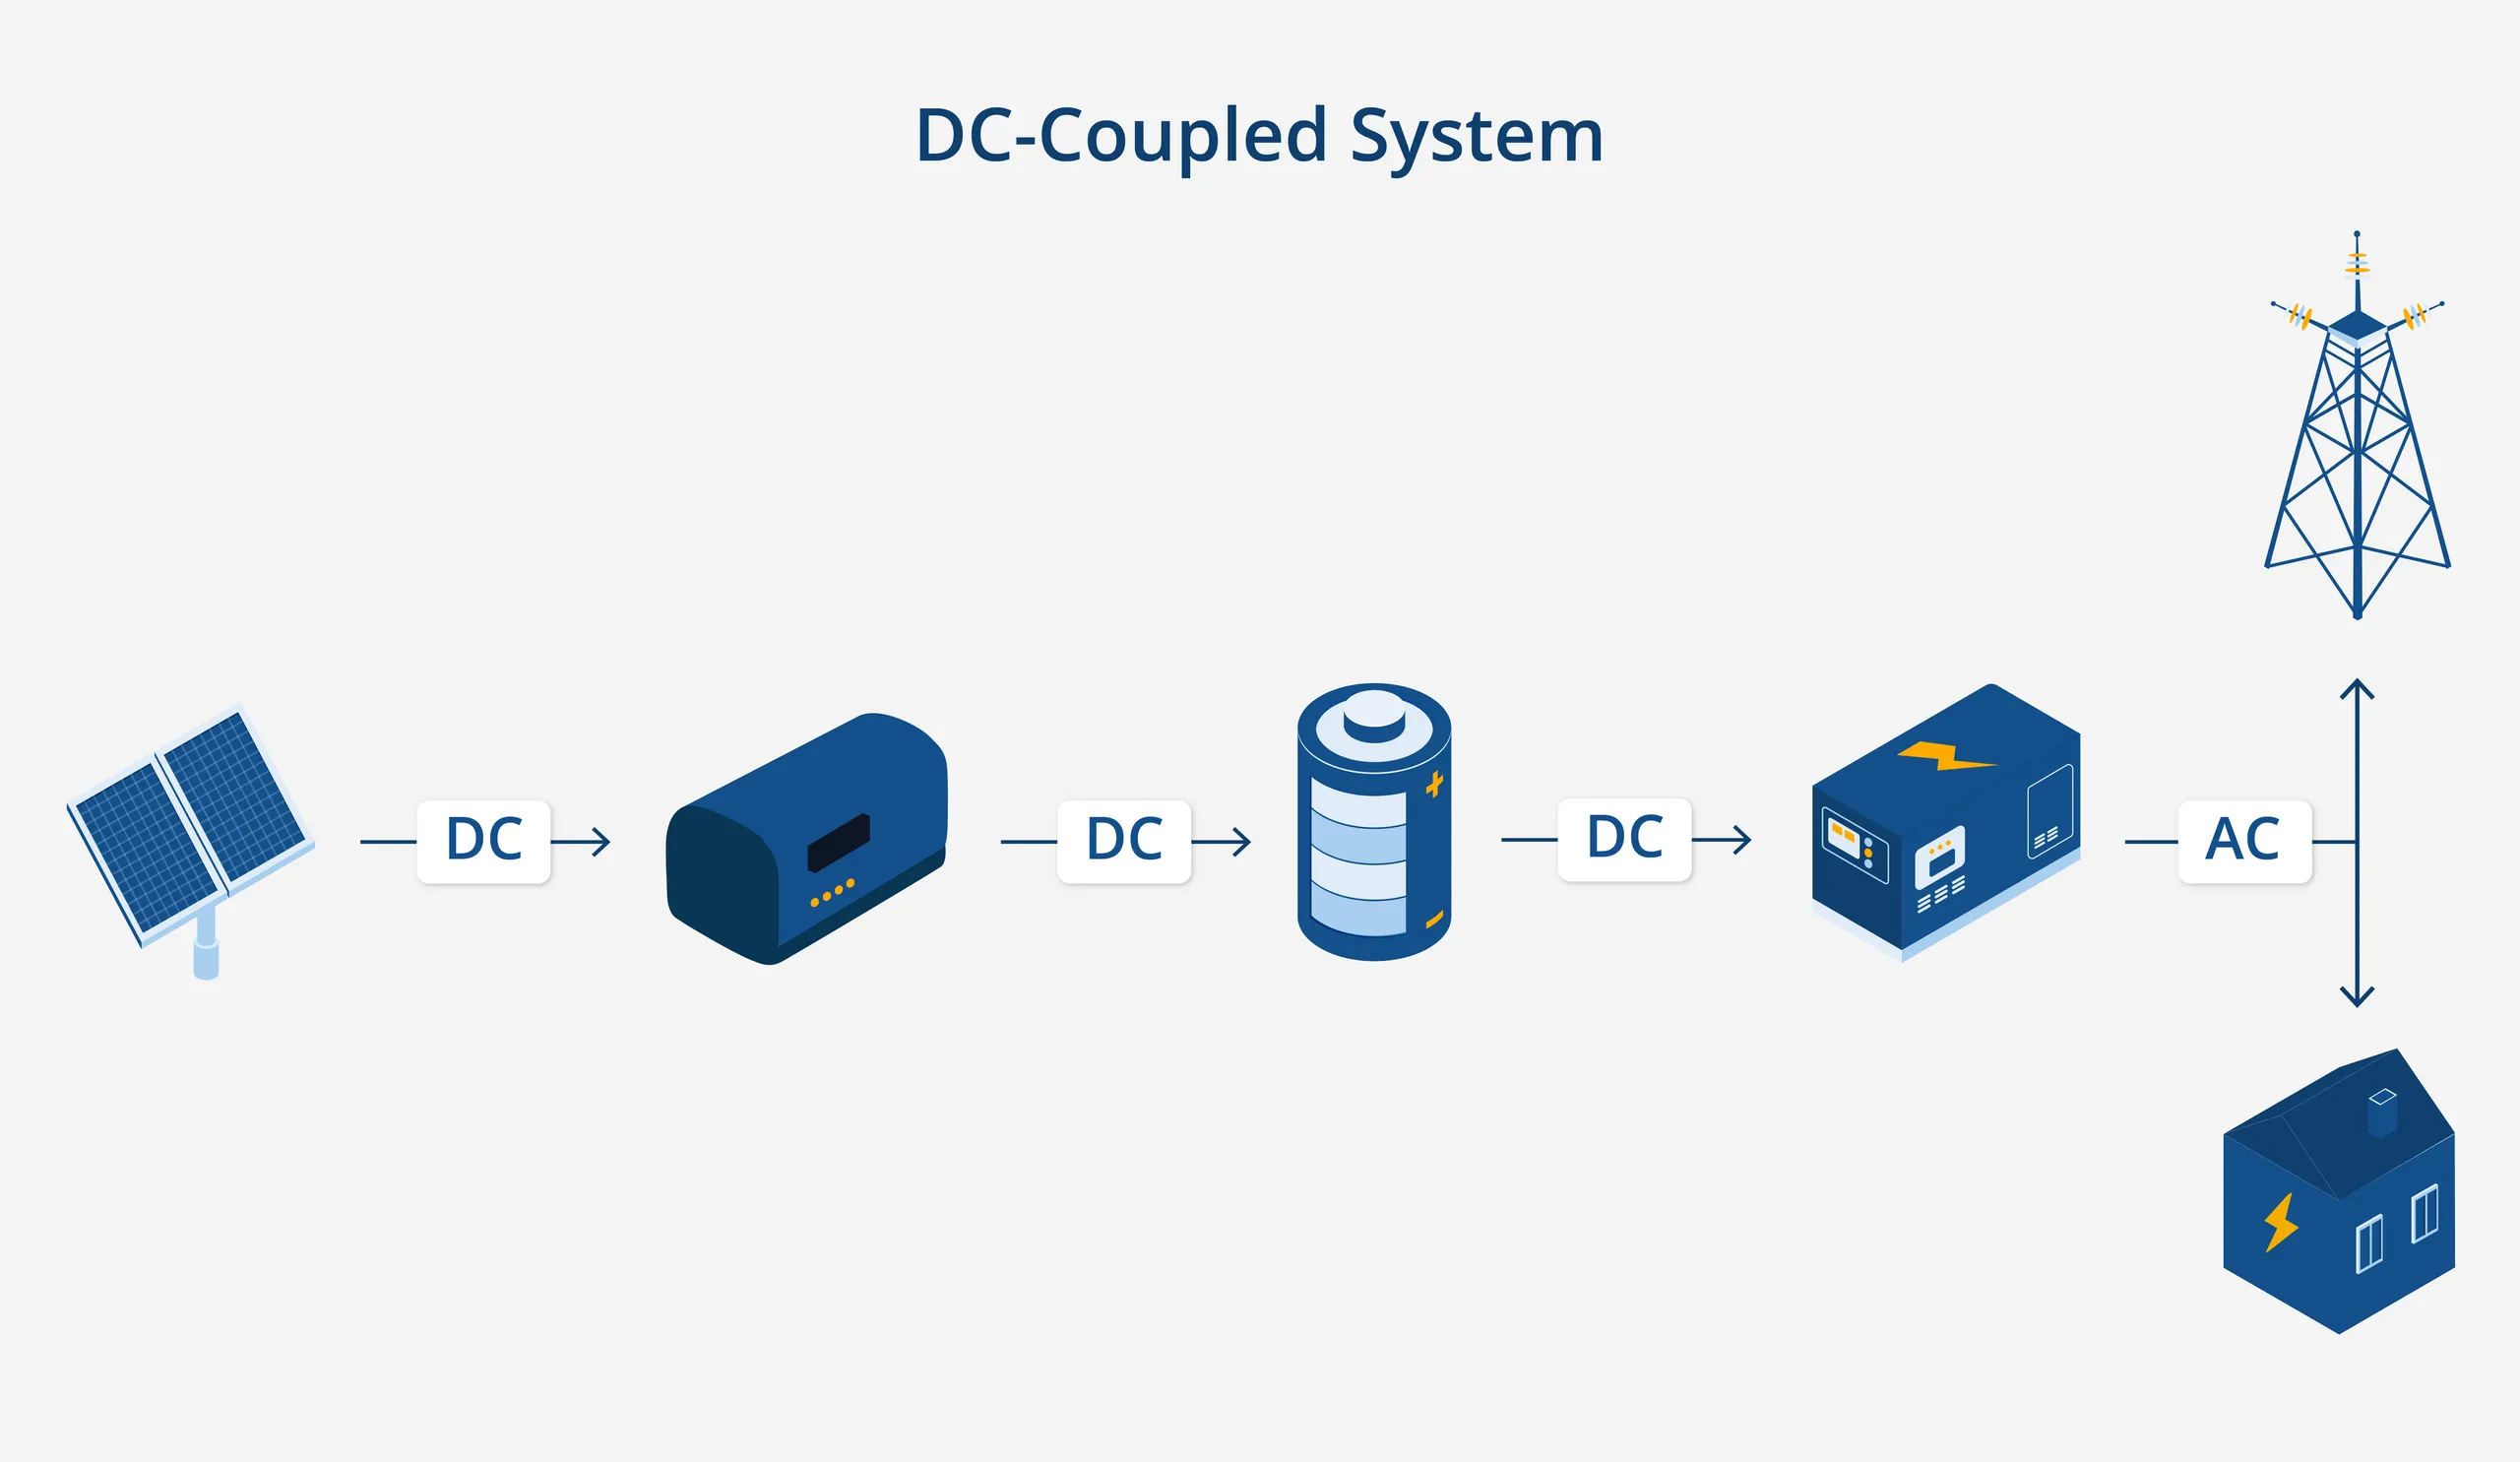 DC-coupled battery energy storage system diagram. Source: RatedPower